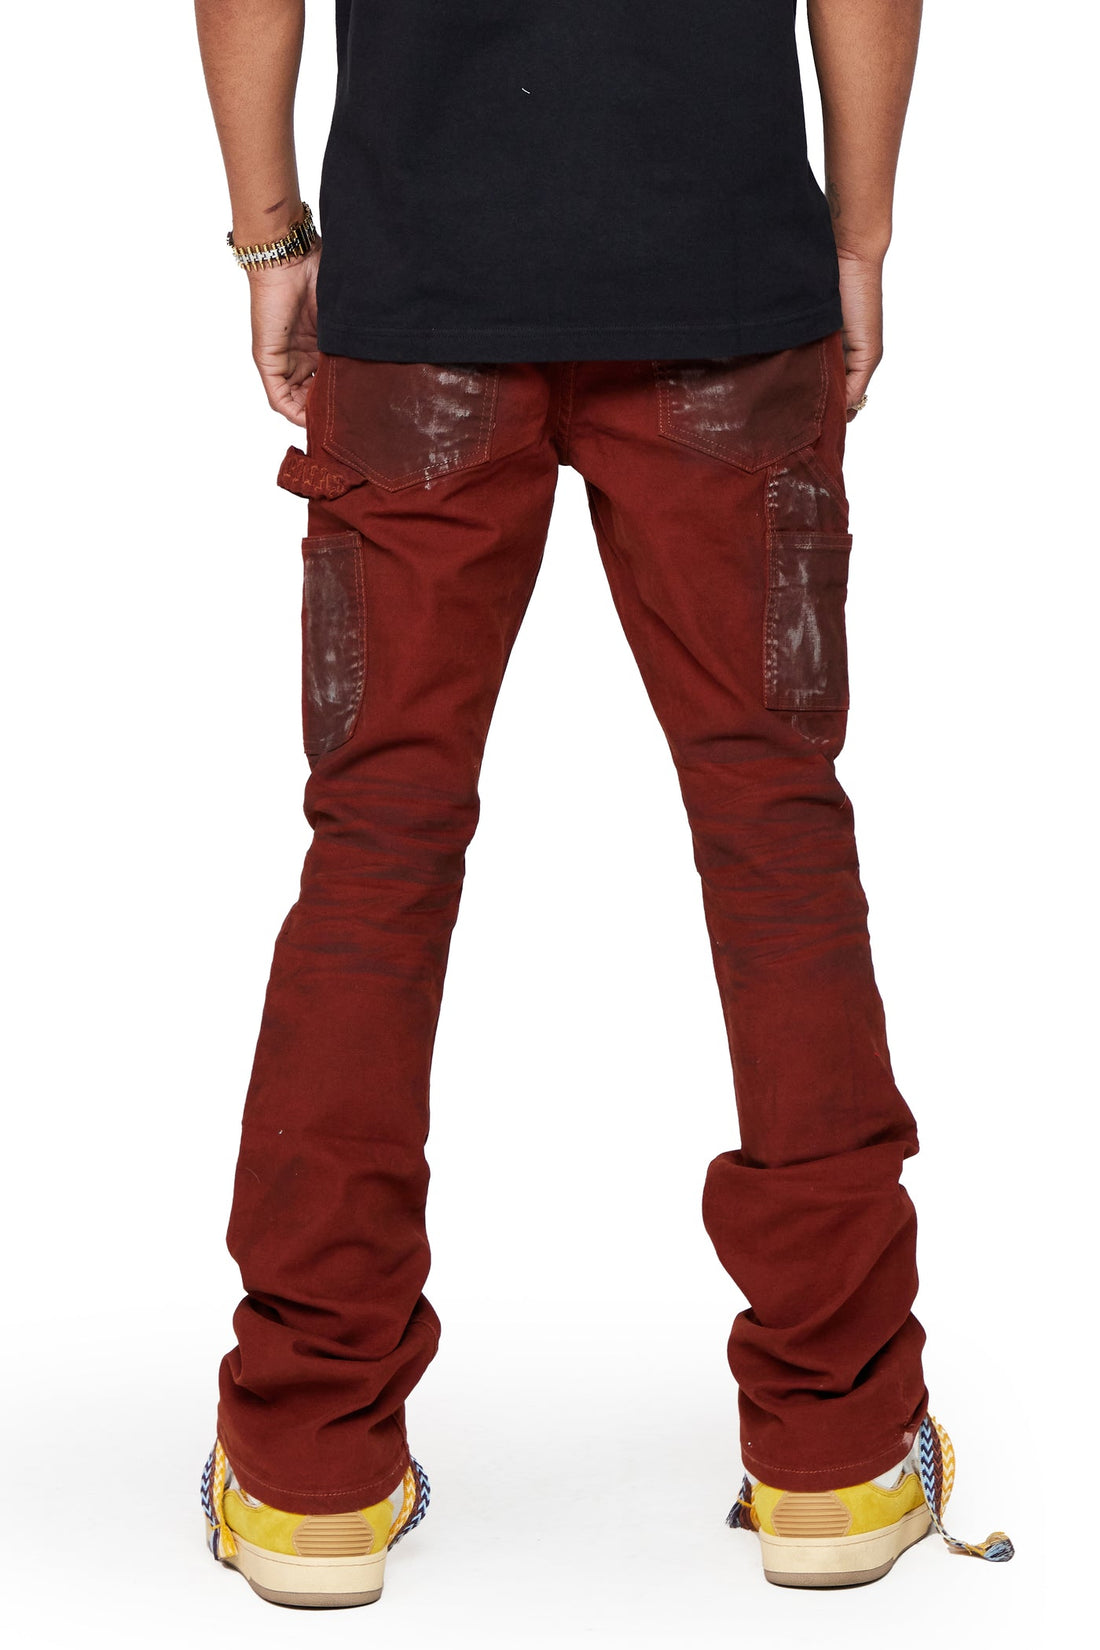 VALABASAS “DIrty Red Wine” JEANS